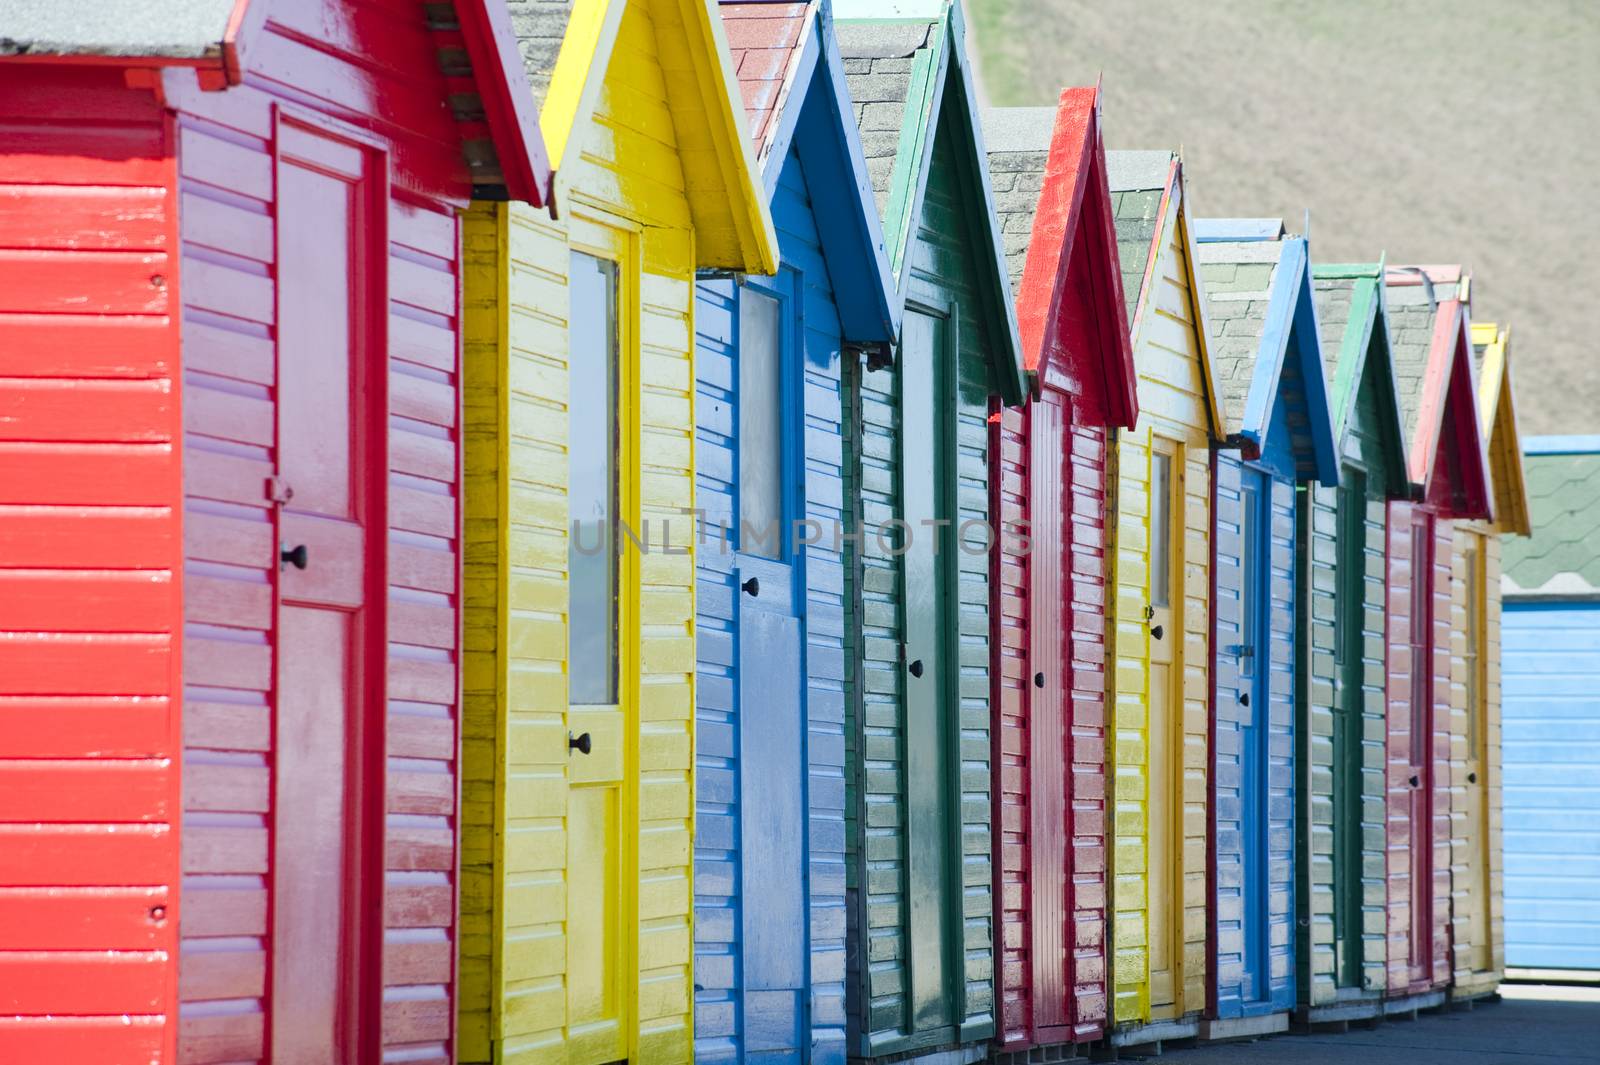 Row of colorful traditional wooden beach huts overlooking the Whitby Sands beach, Whitby, North Yorkshire, close up view receding from the camera